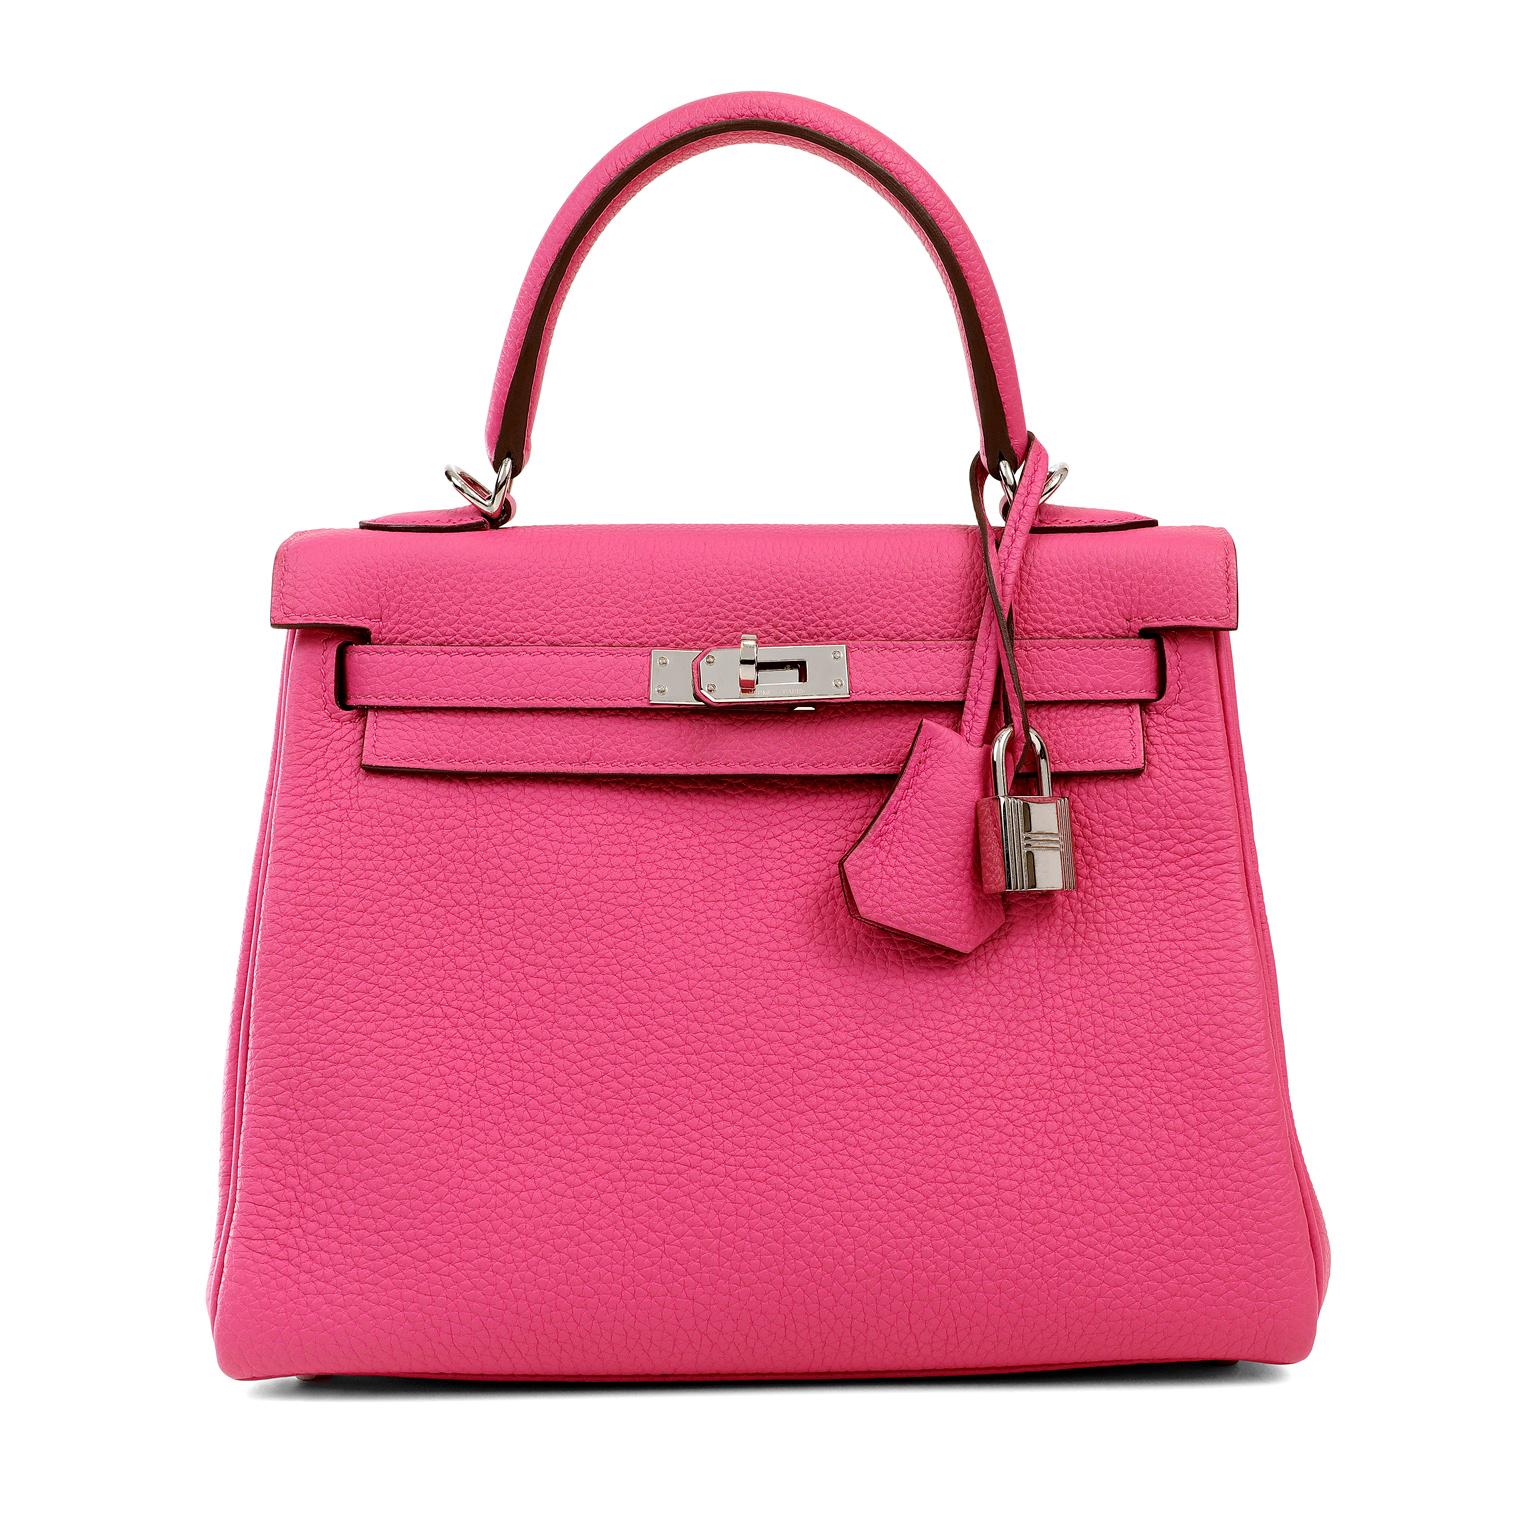 This authentic Hermès Pink Magnolia Togo 25 cm Kelly is in pristine condition.   Hermès bags are considered the ultimate luxury item worldwide.  Each piece is handcrafted with waitlists that can exceed a year or more.  The ladylike Kelly is classic